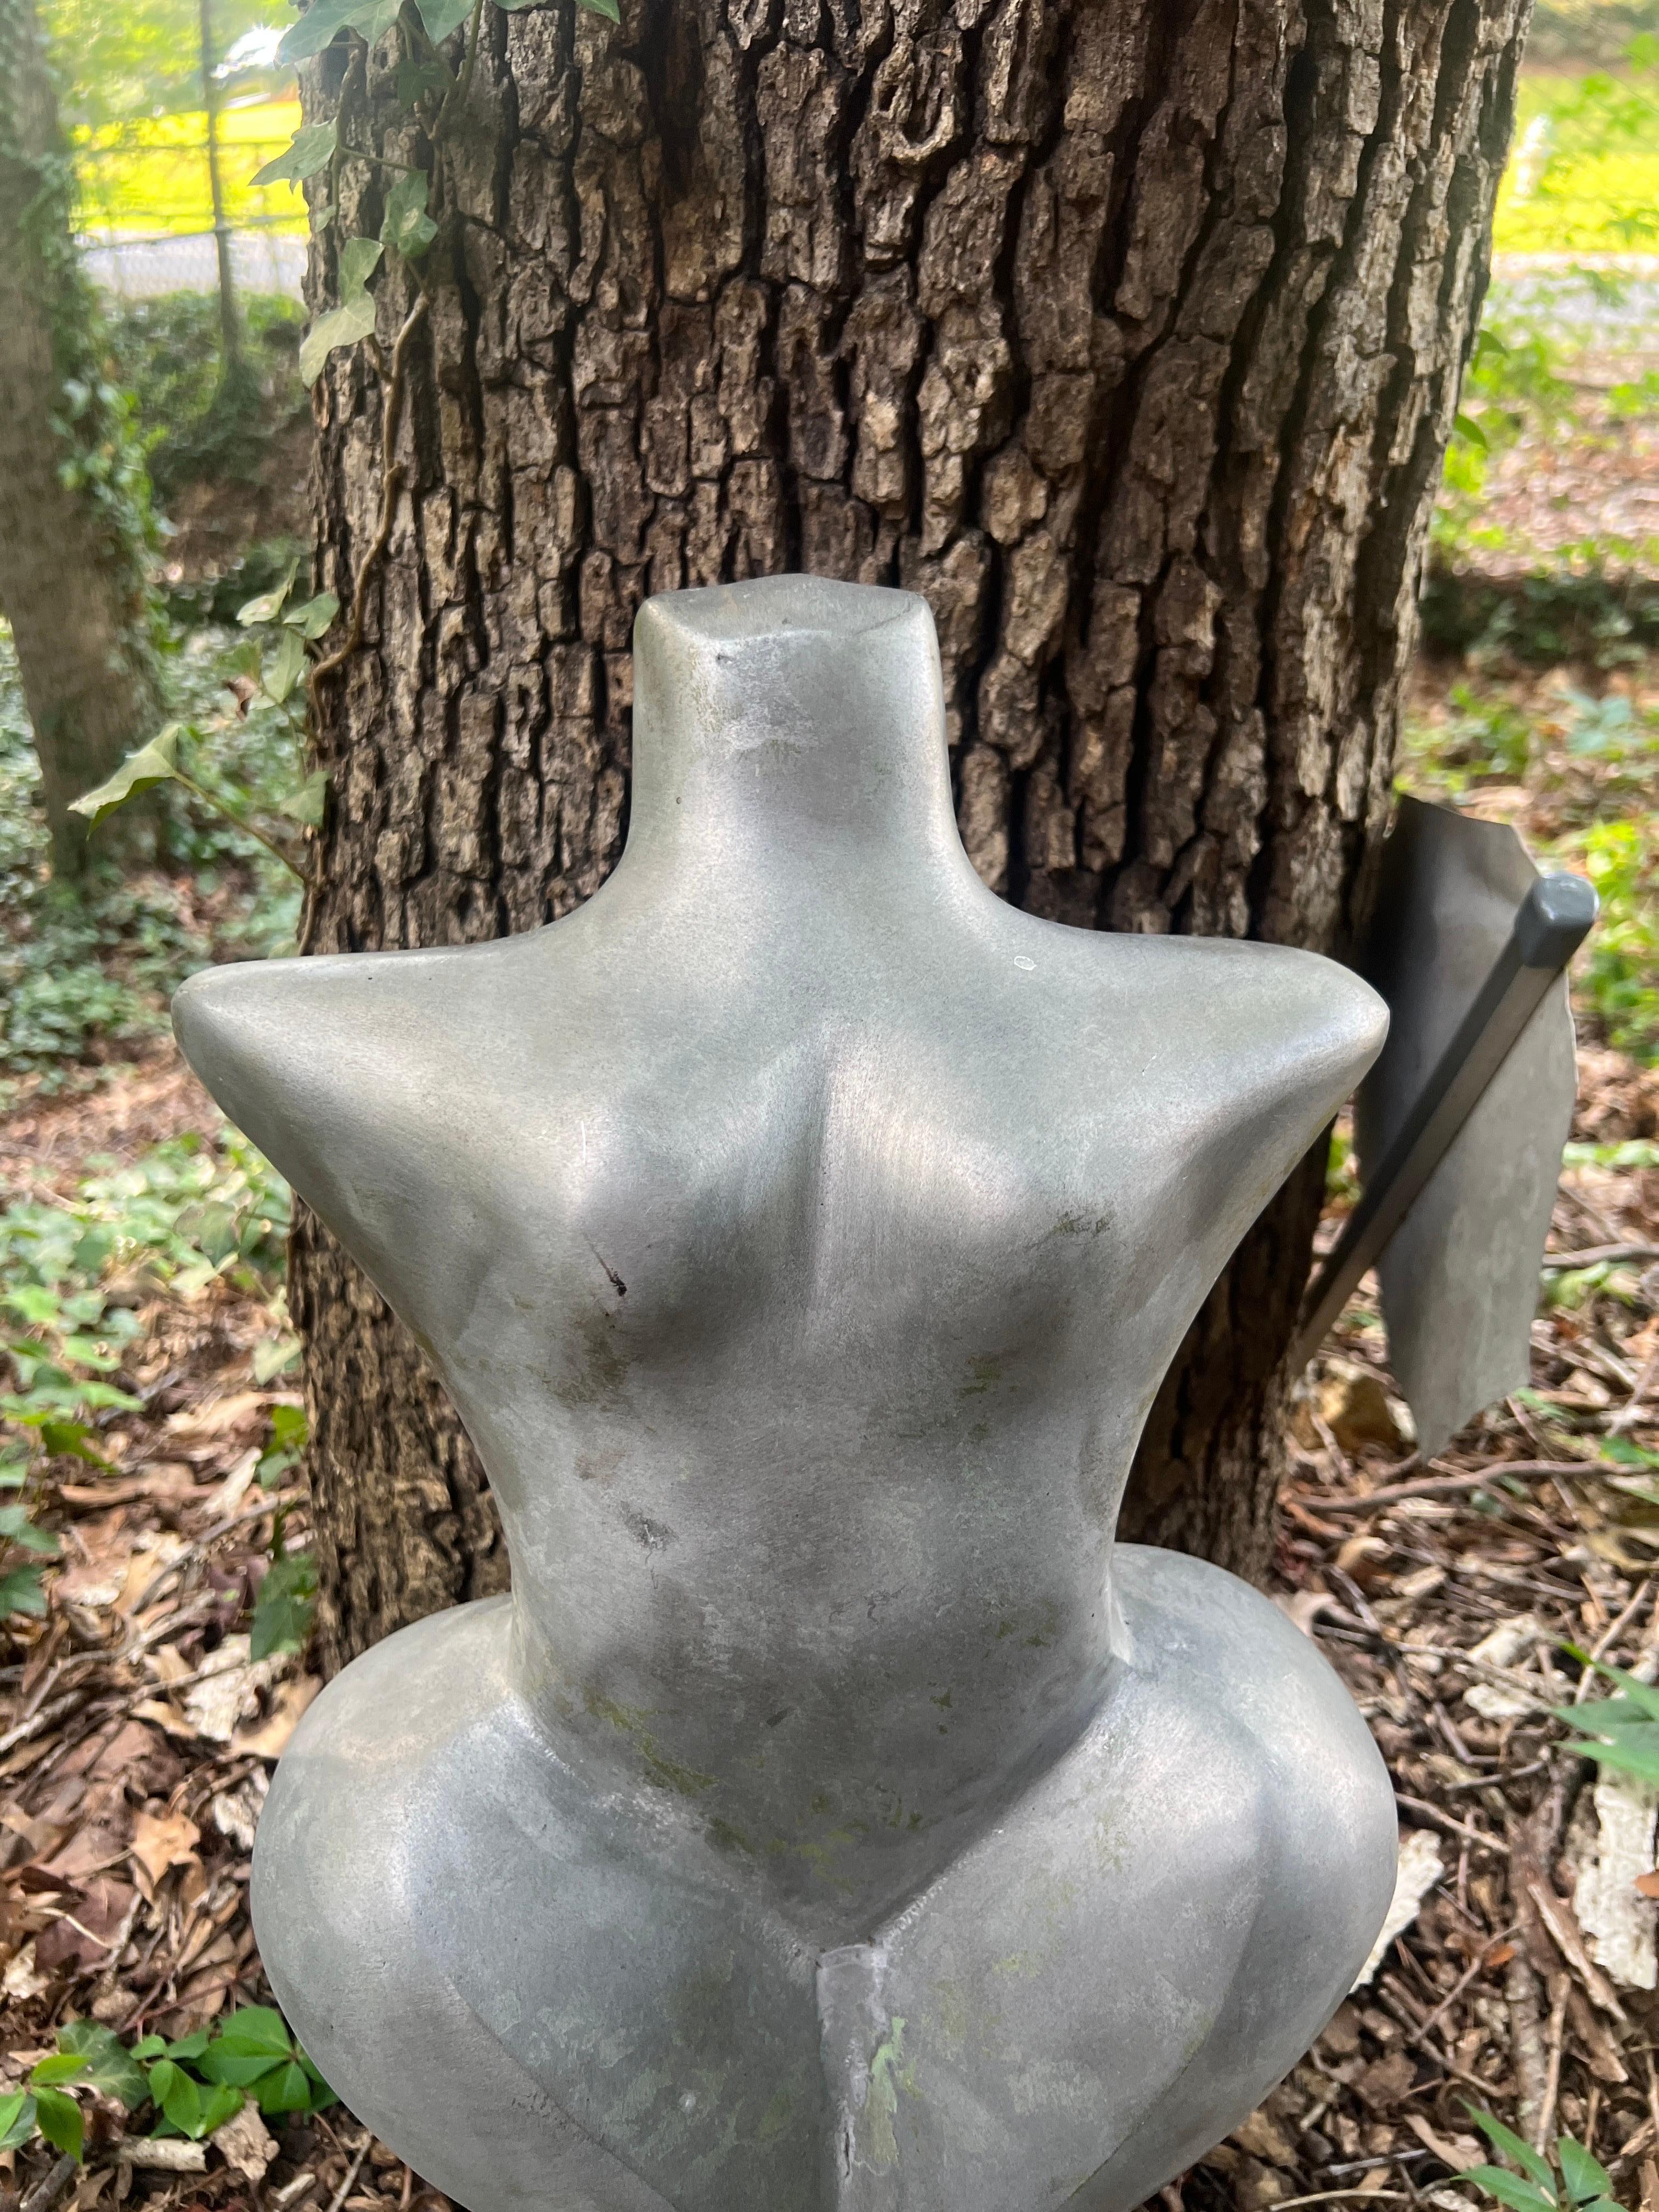 Possibly French, early 20th century. 

A very unique aluminum sculpture depicting a nude female torso, possibly a Venus representation. 
This piece came out of a New England garden where it sat for what the estate claims to be over 30 years.